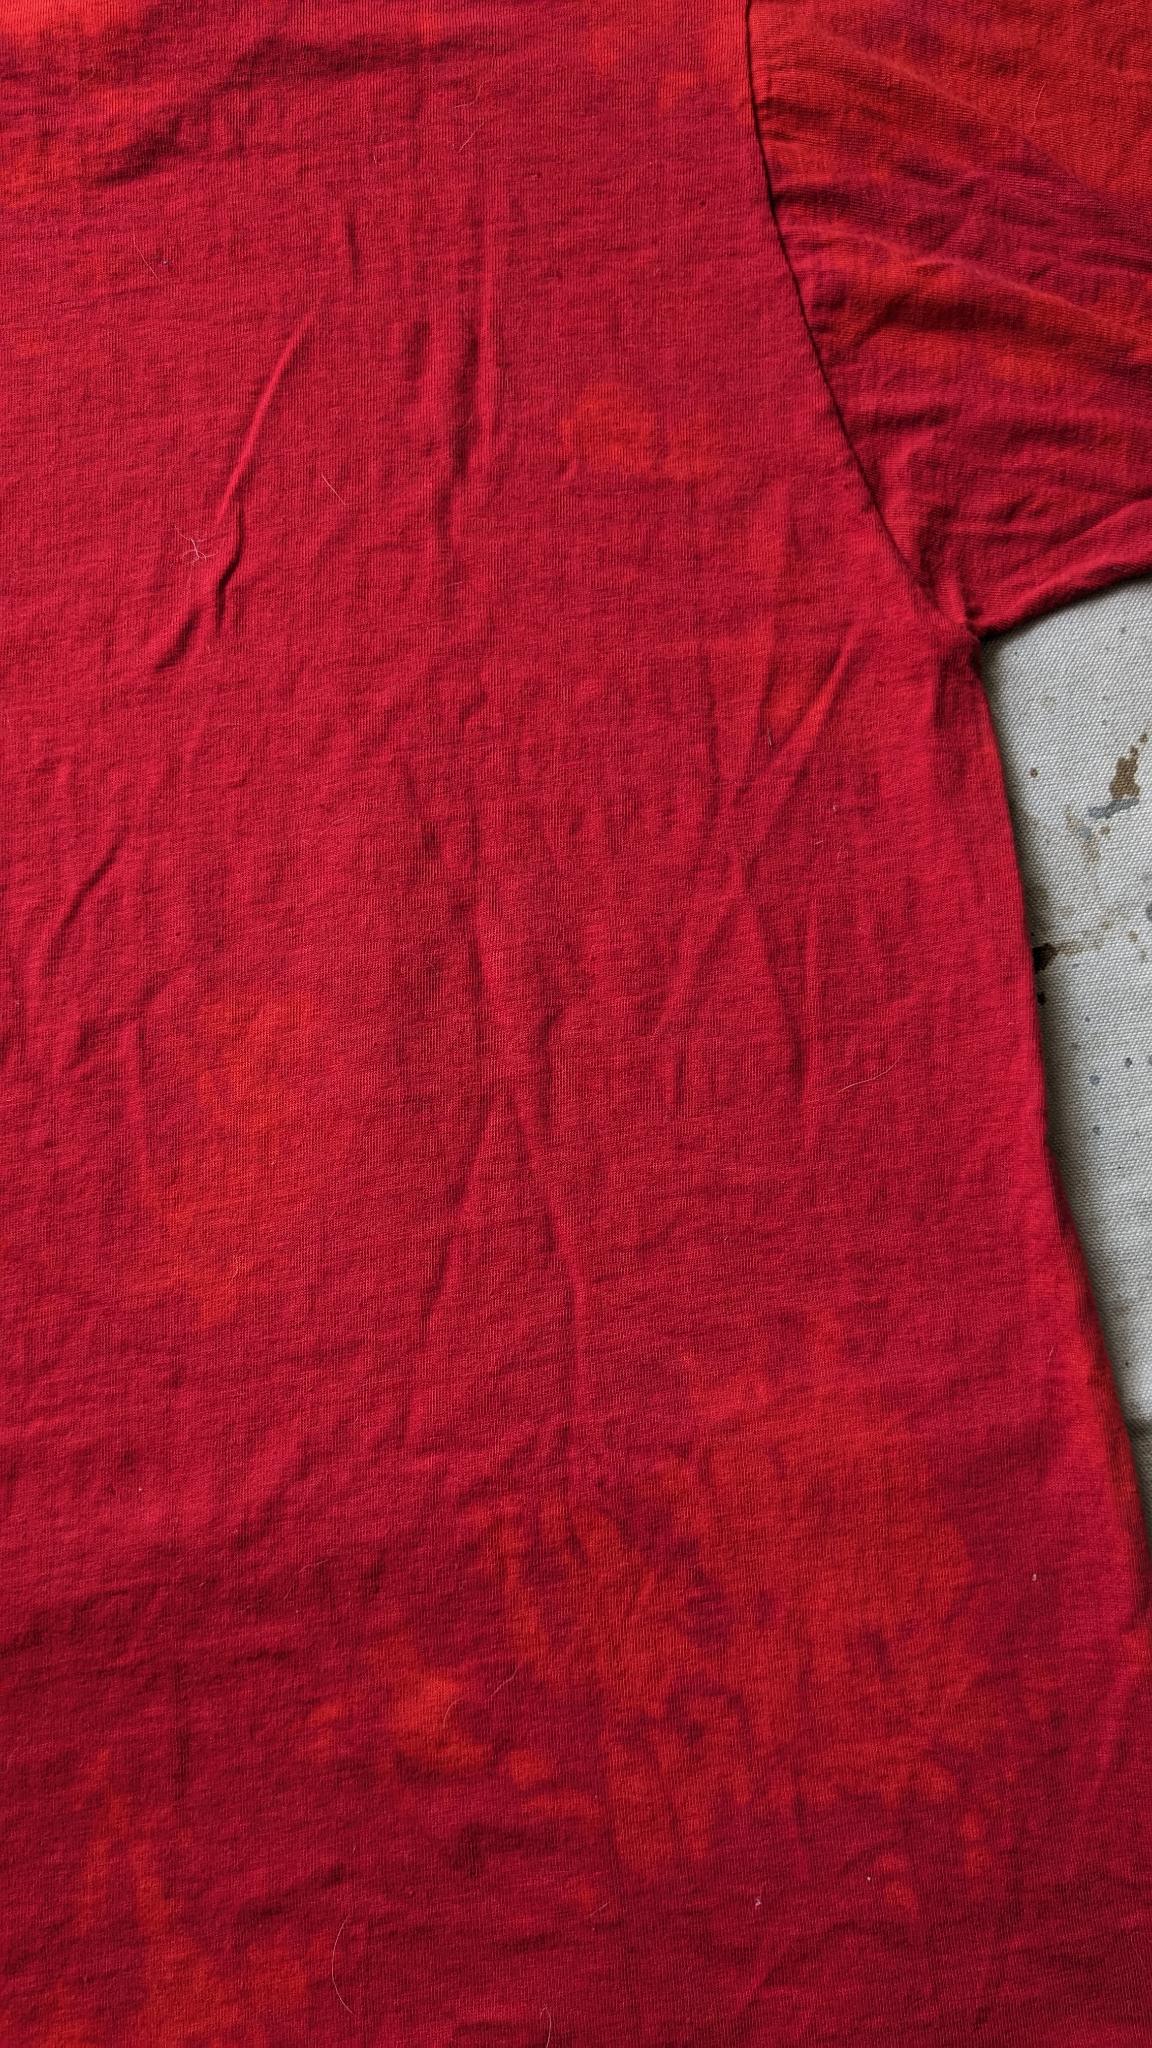 All cotton red tee